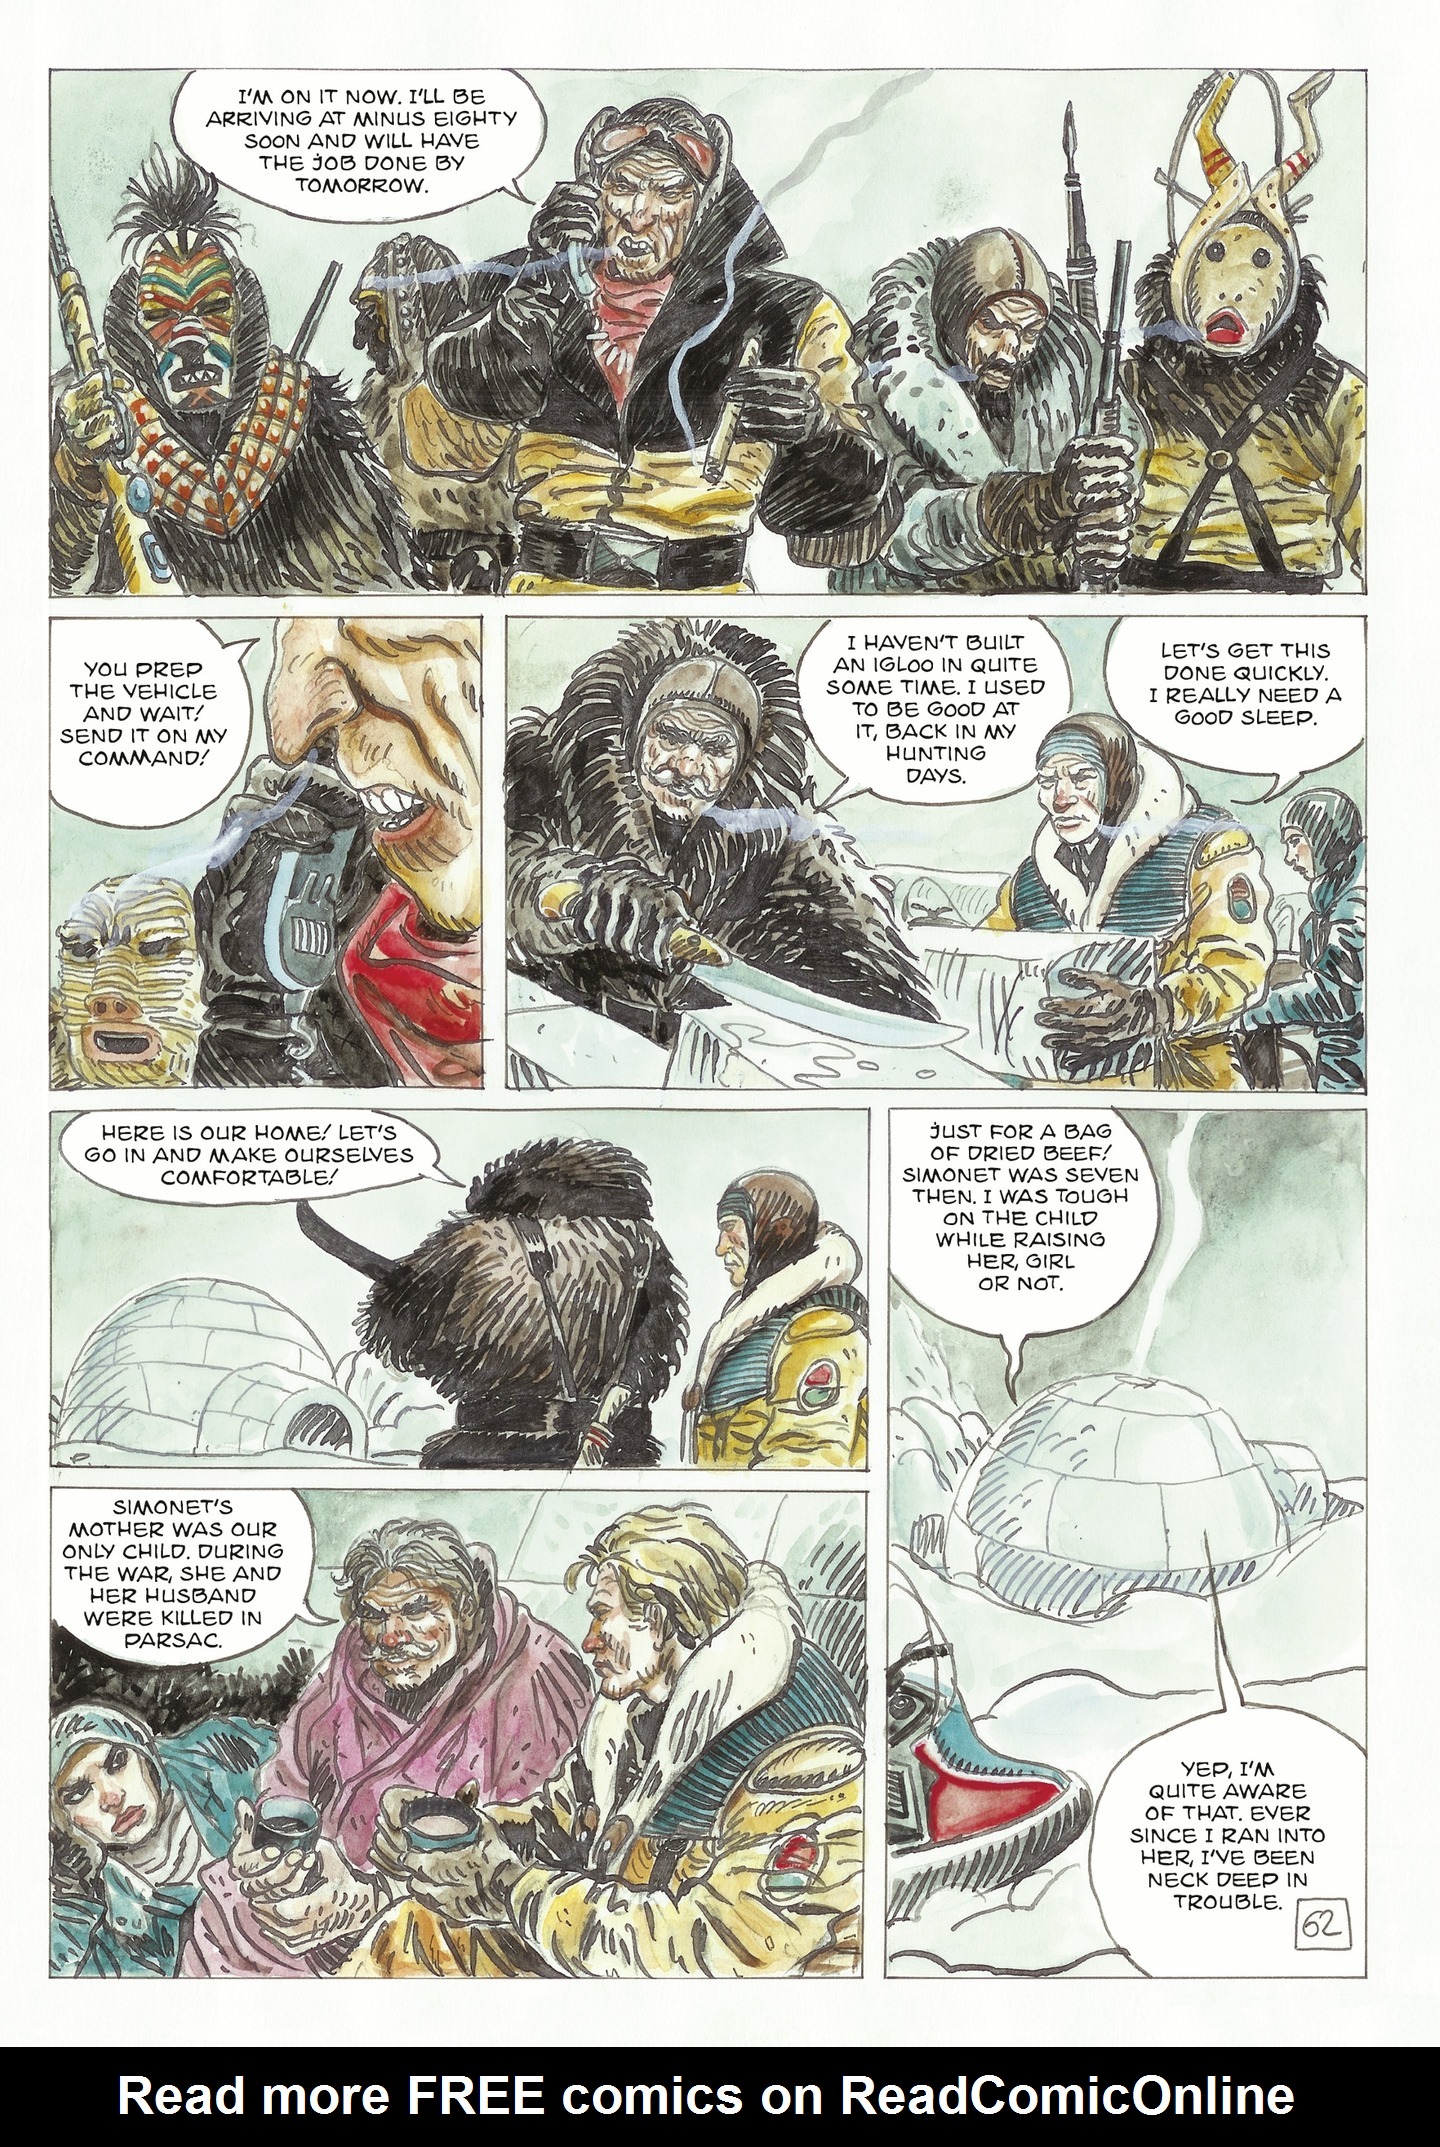 Read online The Man With the Bear comic -  Issue #2 - 8